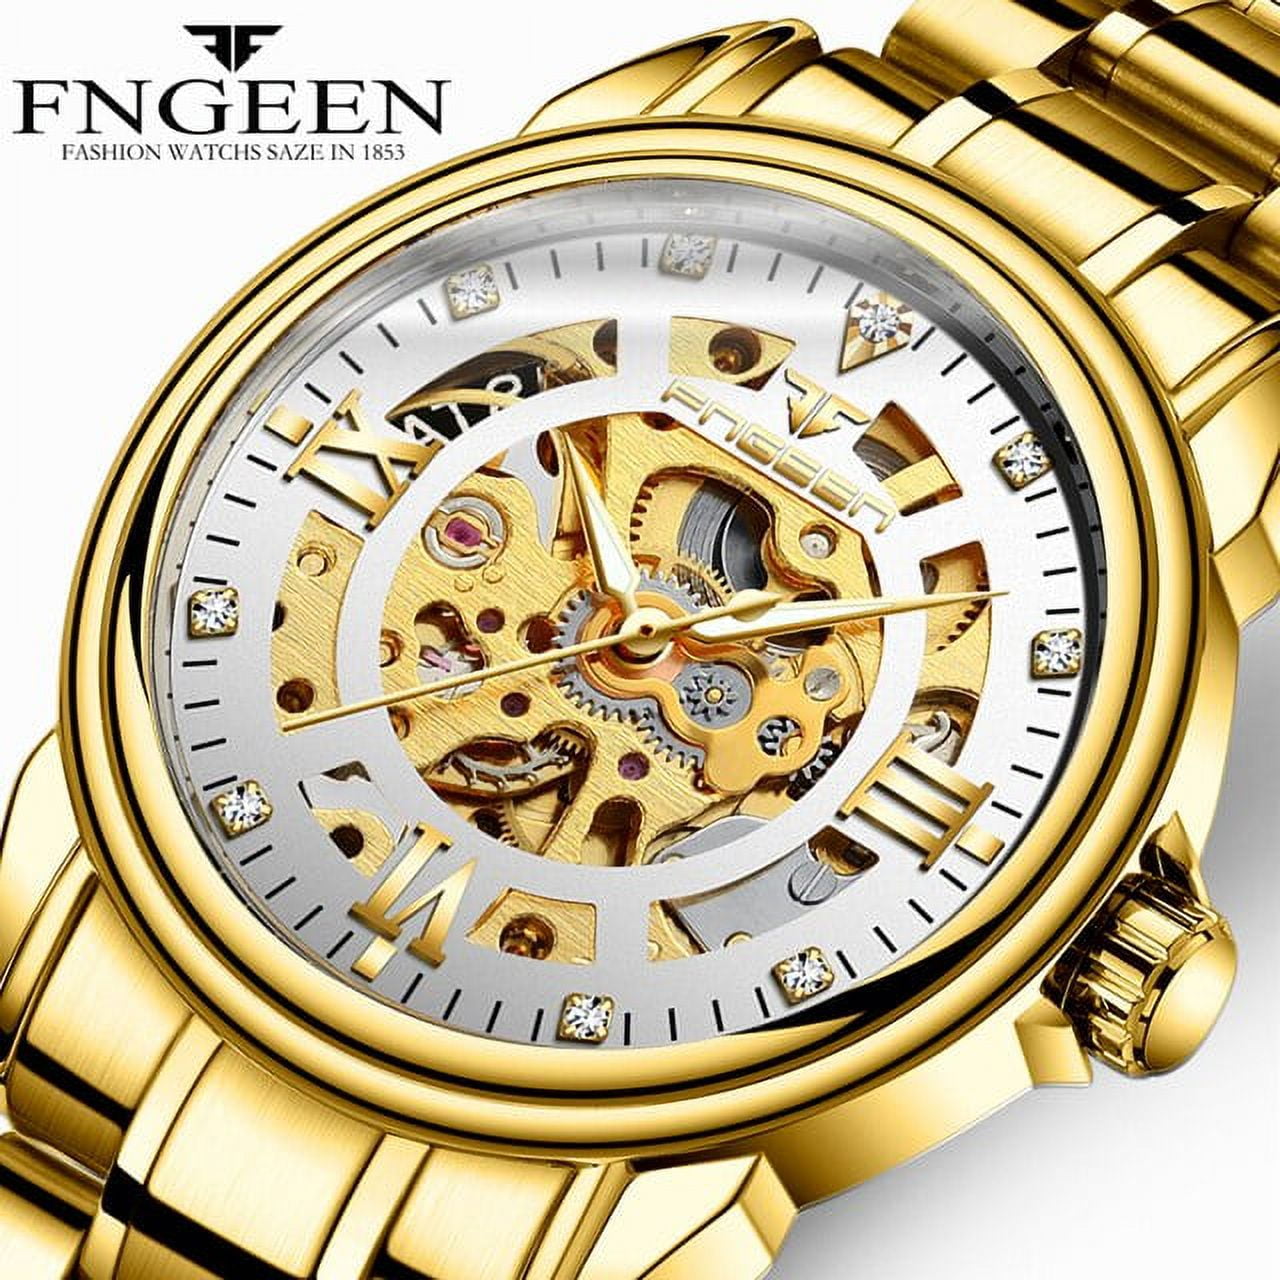 31 Gold Watches for Men at Every Price Range